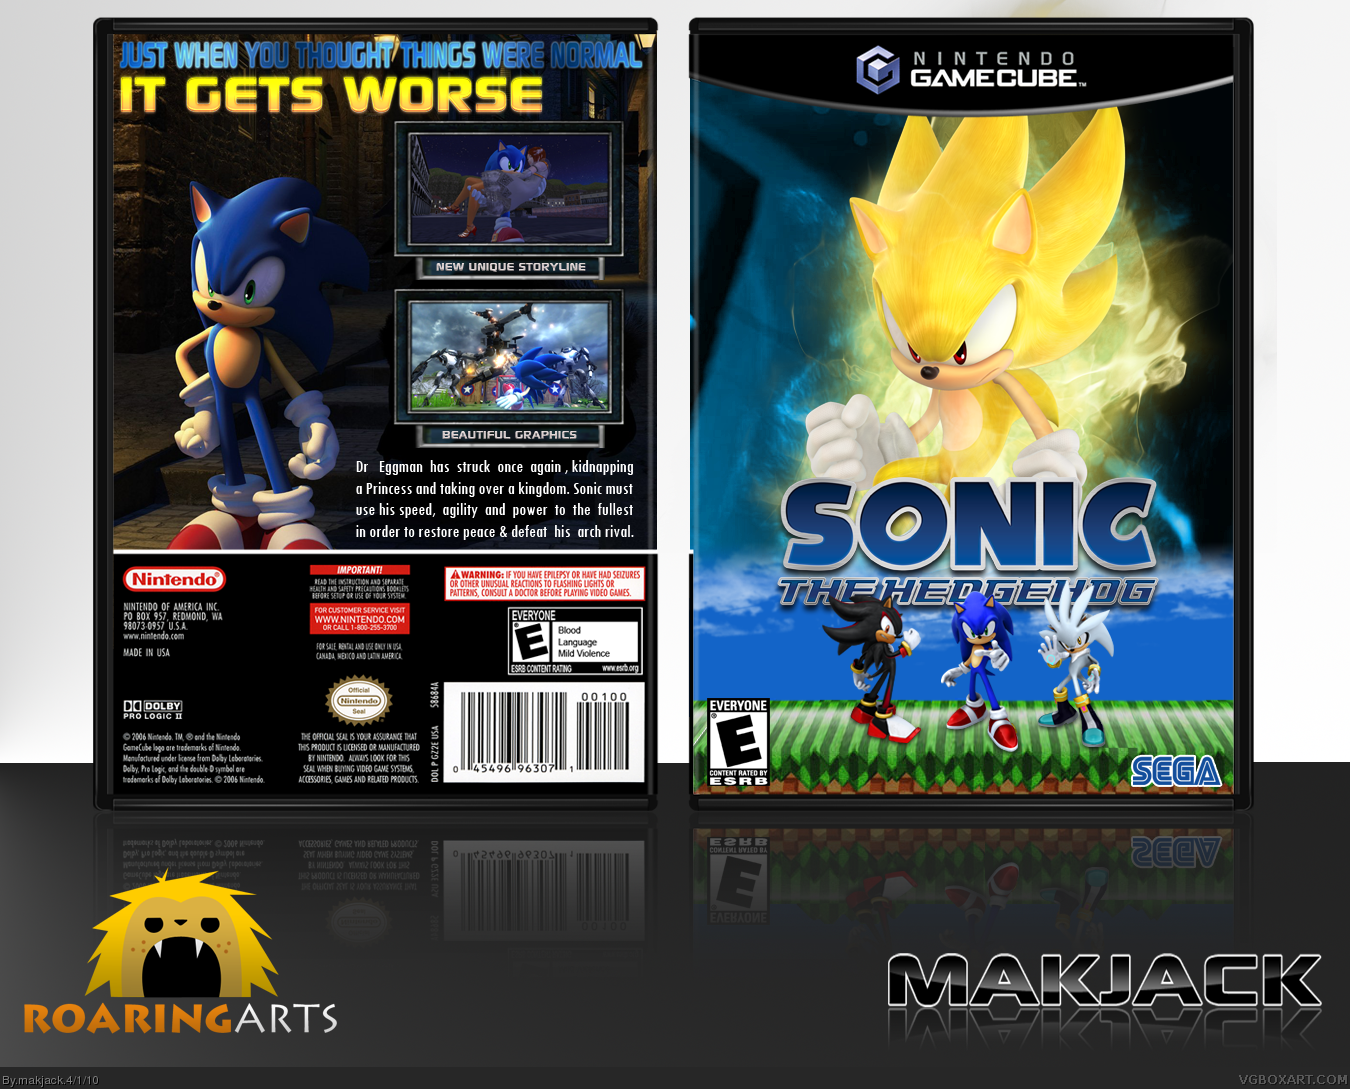 Viewing full size Sonic the Hedgehog box cover